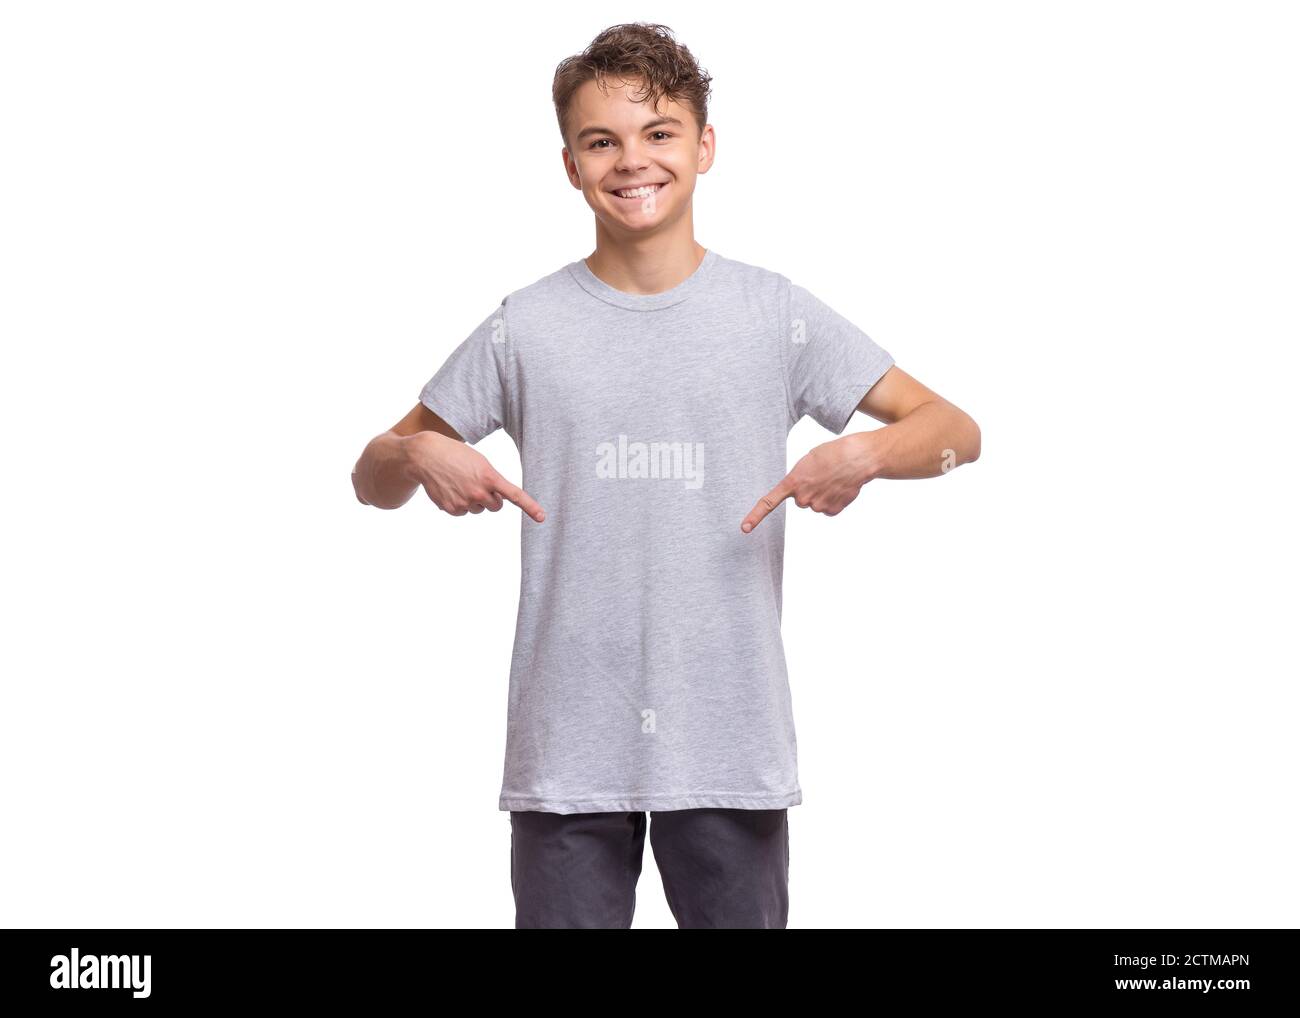 Smiling teen boy, isolated on white background. Happy child pointing fingers at blank t-shirt. Stock Photo